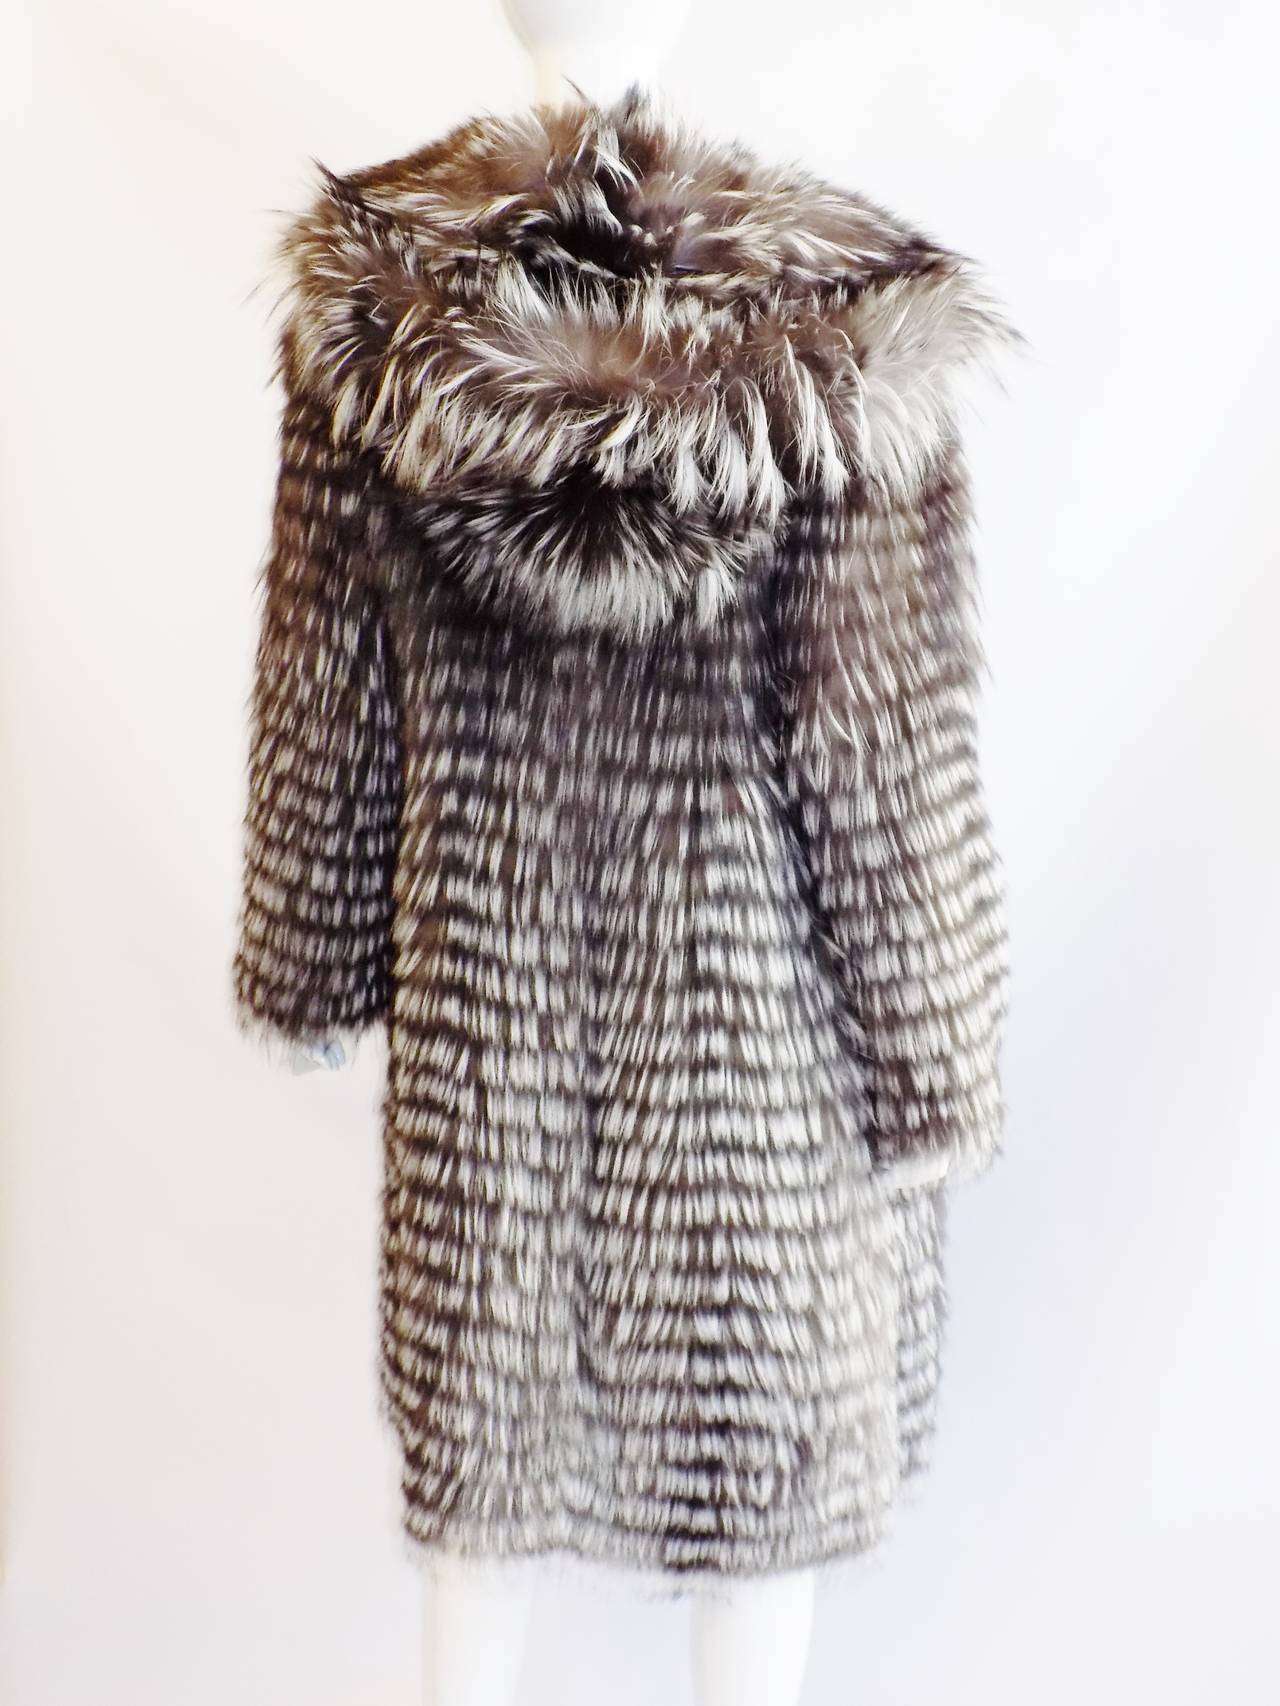 New Never worn Carmen Marc Valvo Couture Feathered Silver fox  Hooded  Fur coat . Lite as a 